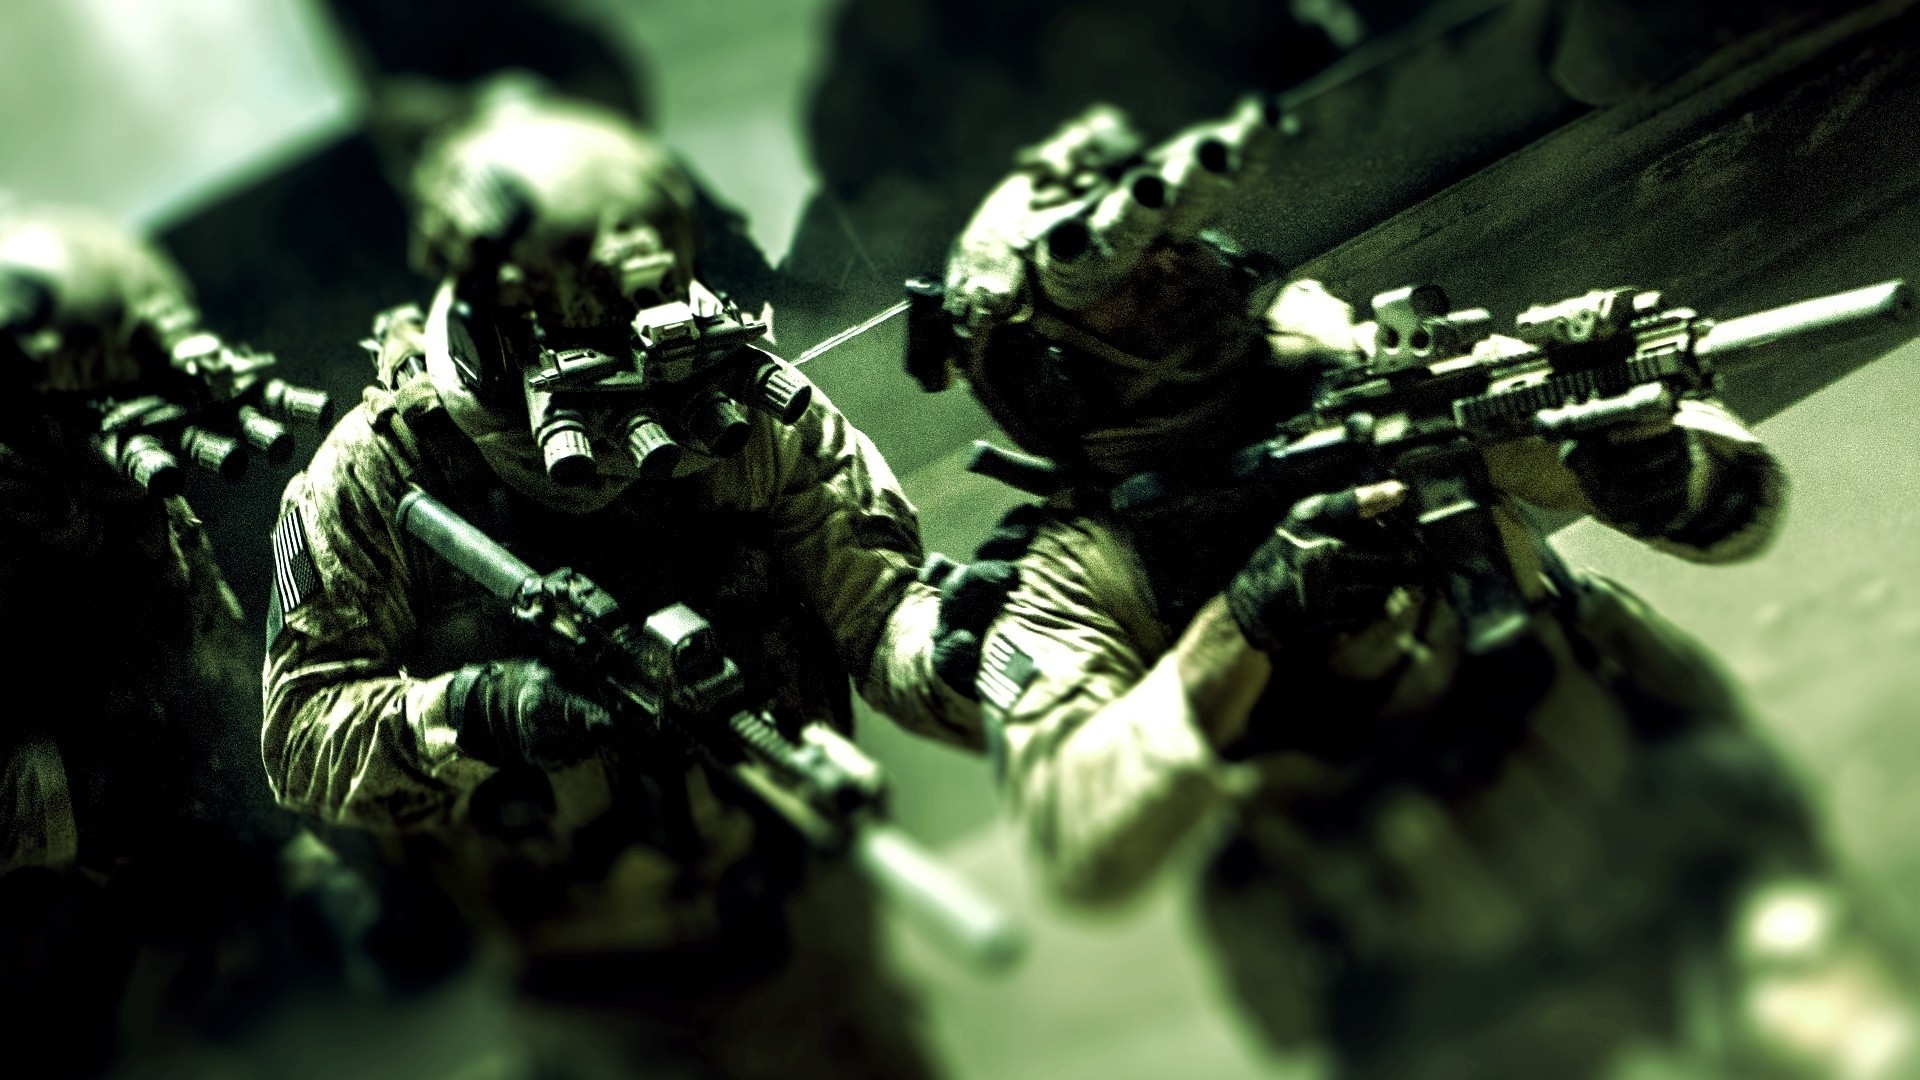 navy seals wallpaper hd,soldier,military,personal protective equipment,army,military organization